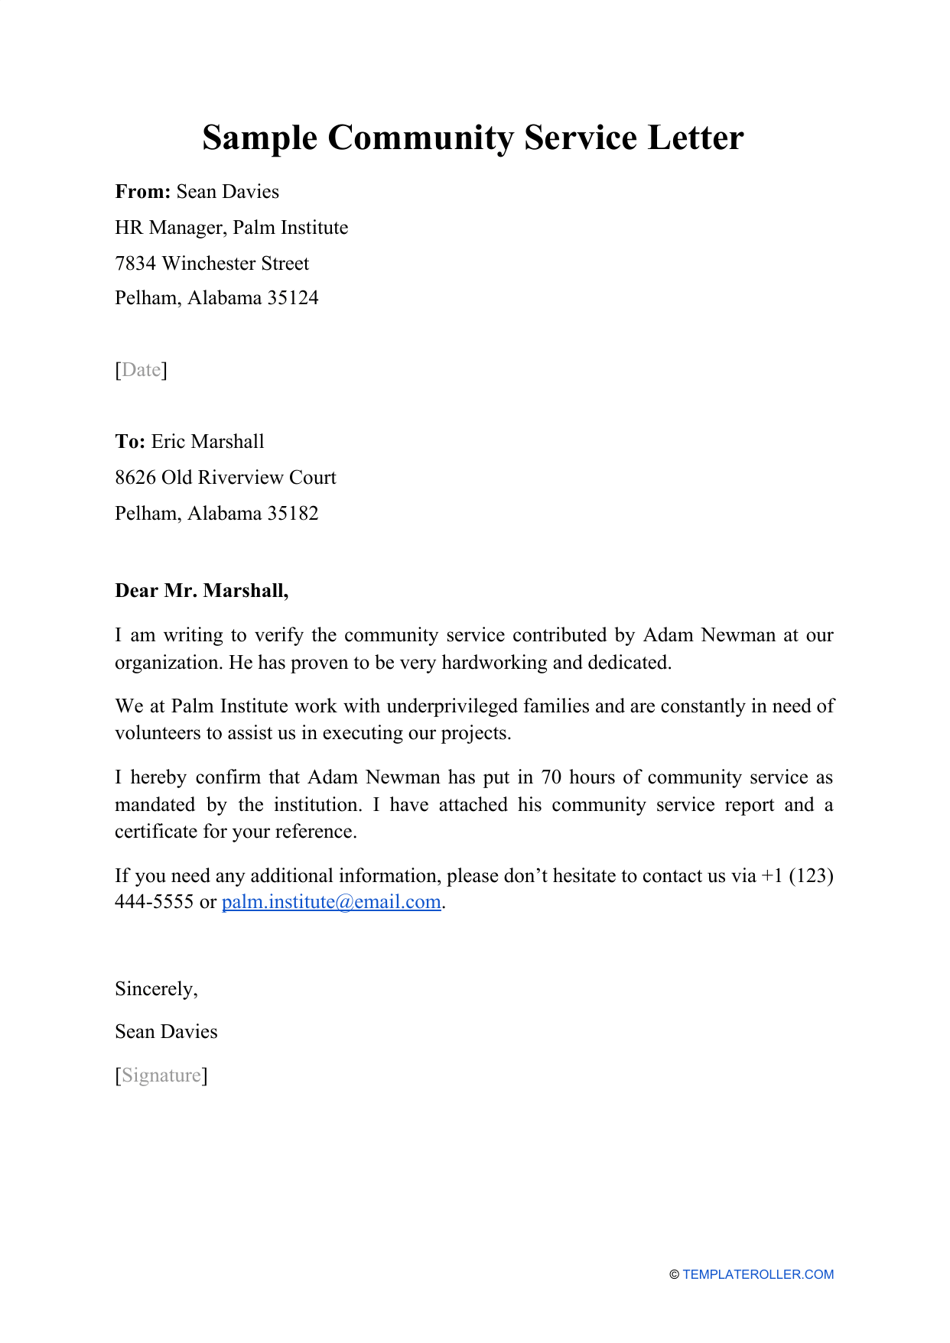 Sample Community Service Letter - Document Preview